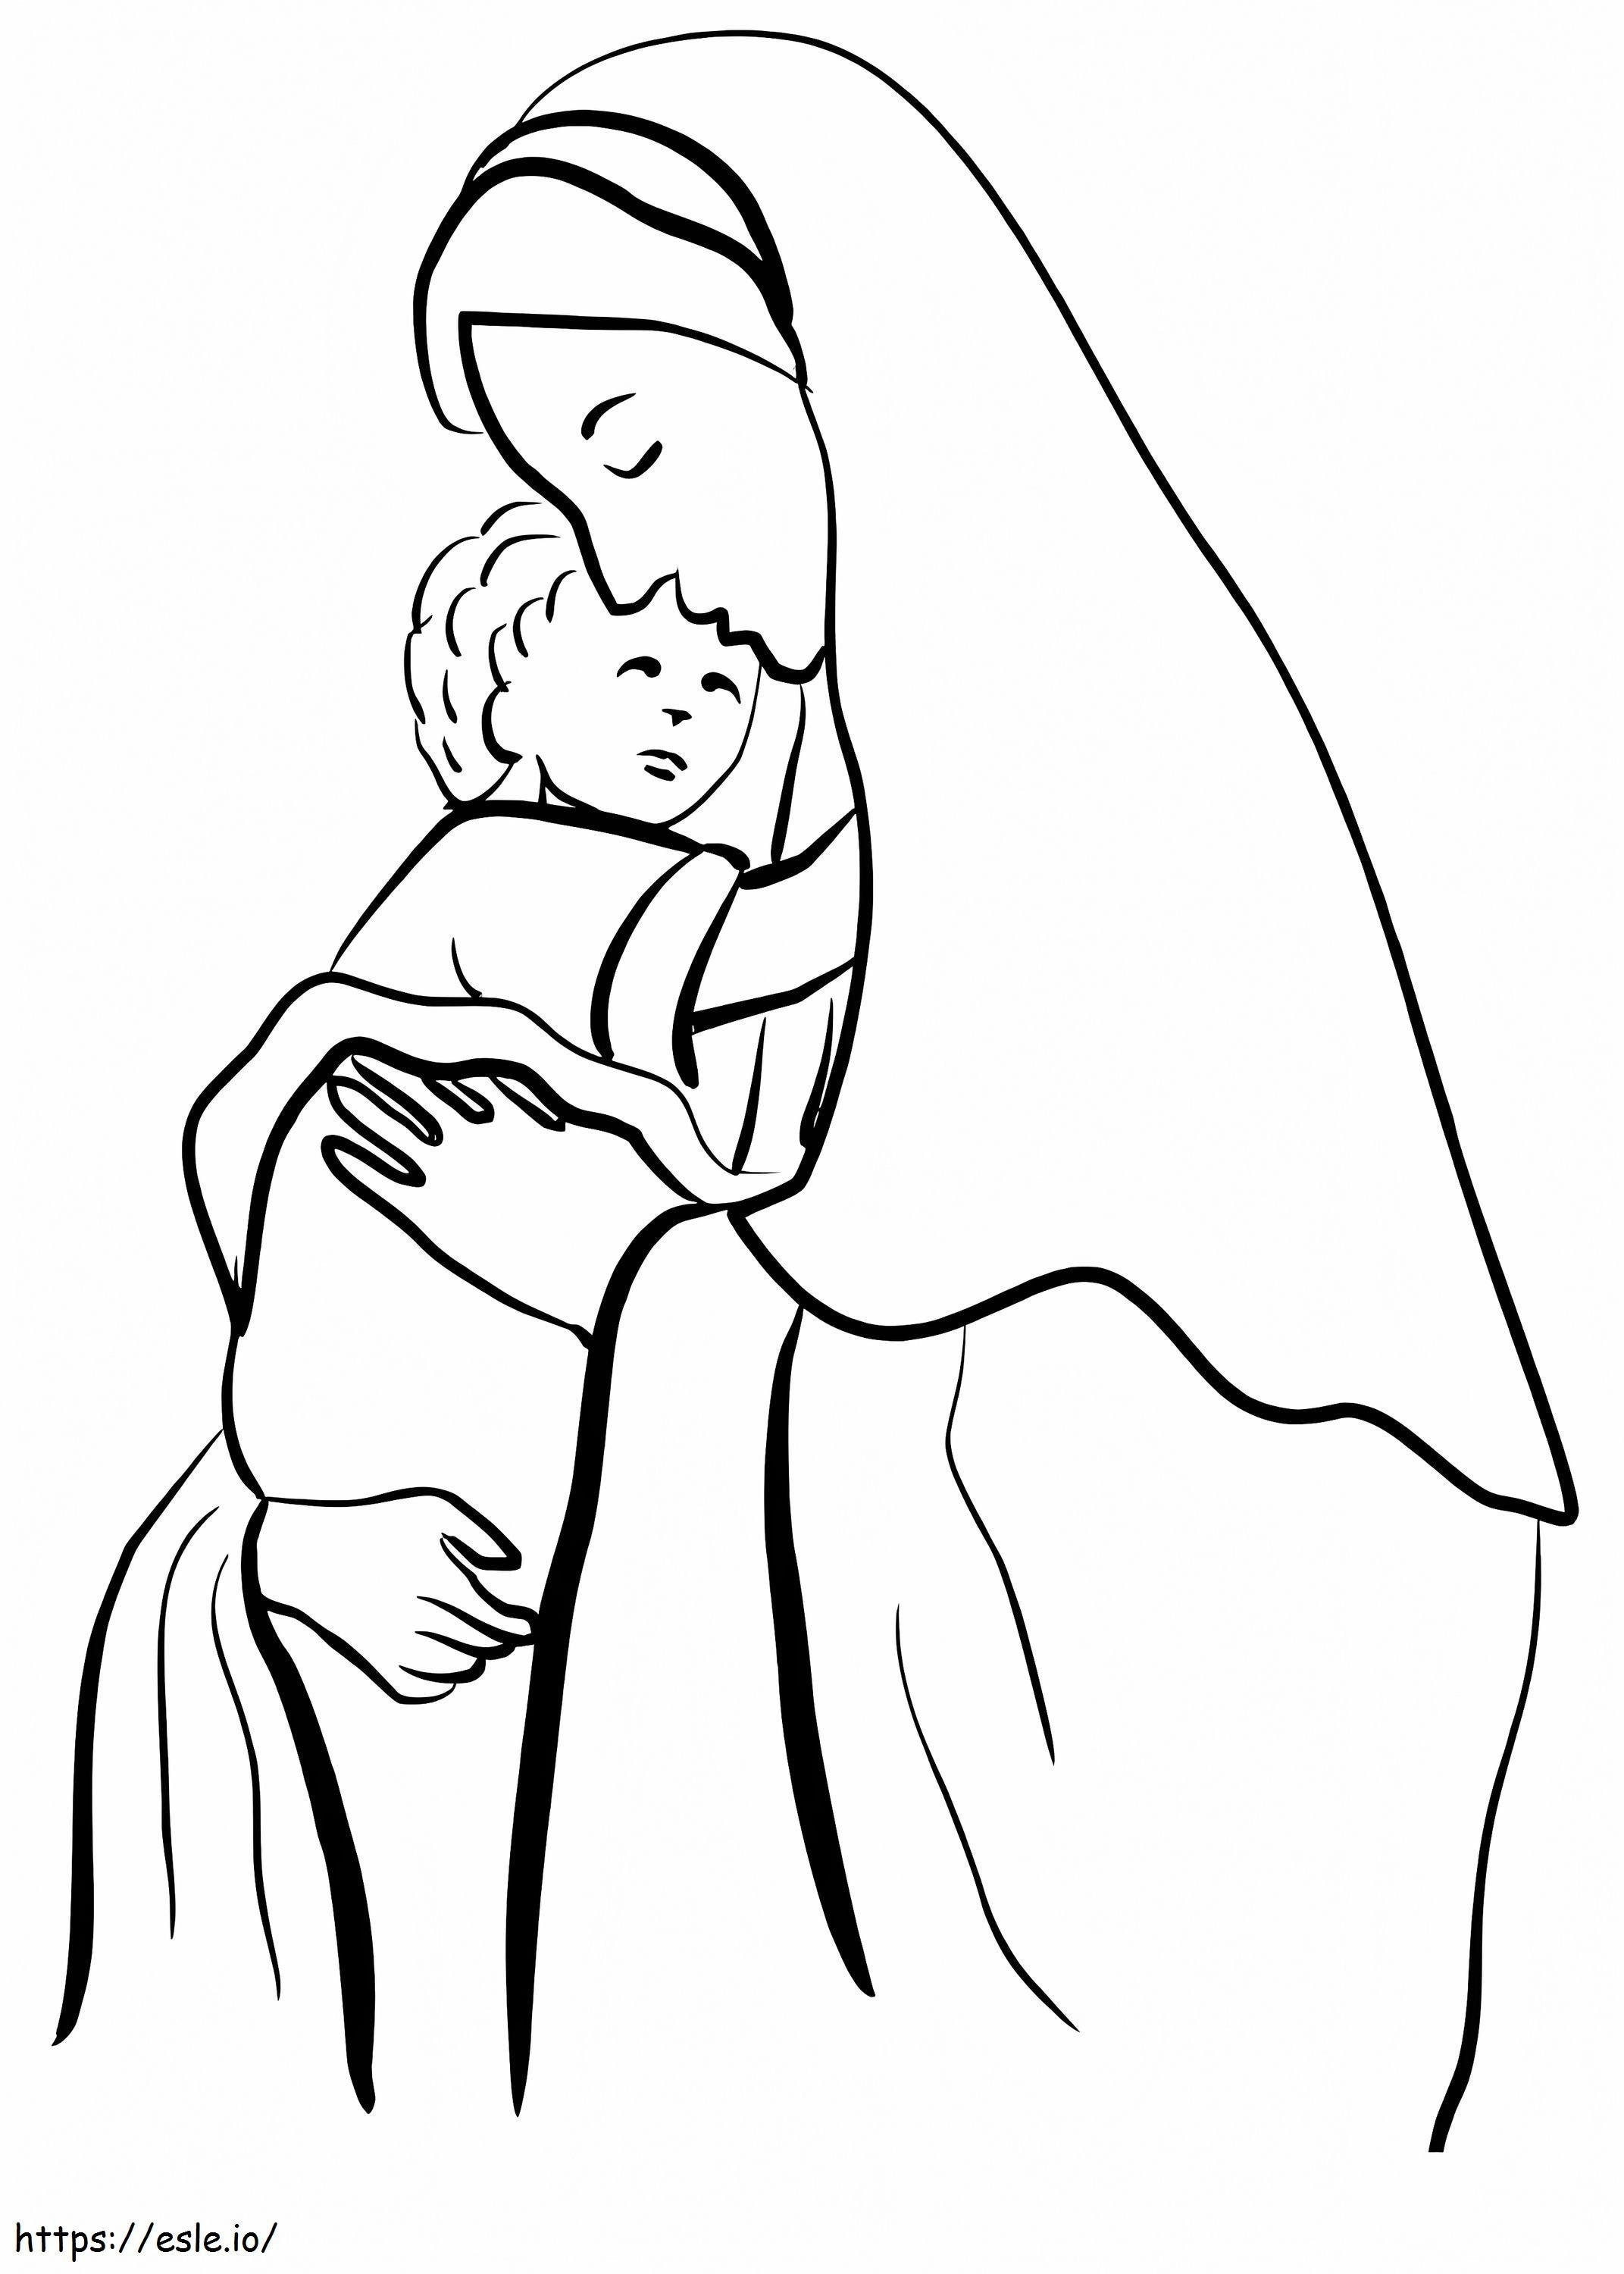 Mother Mary Holding Child Jesus coloring page